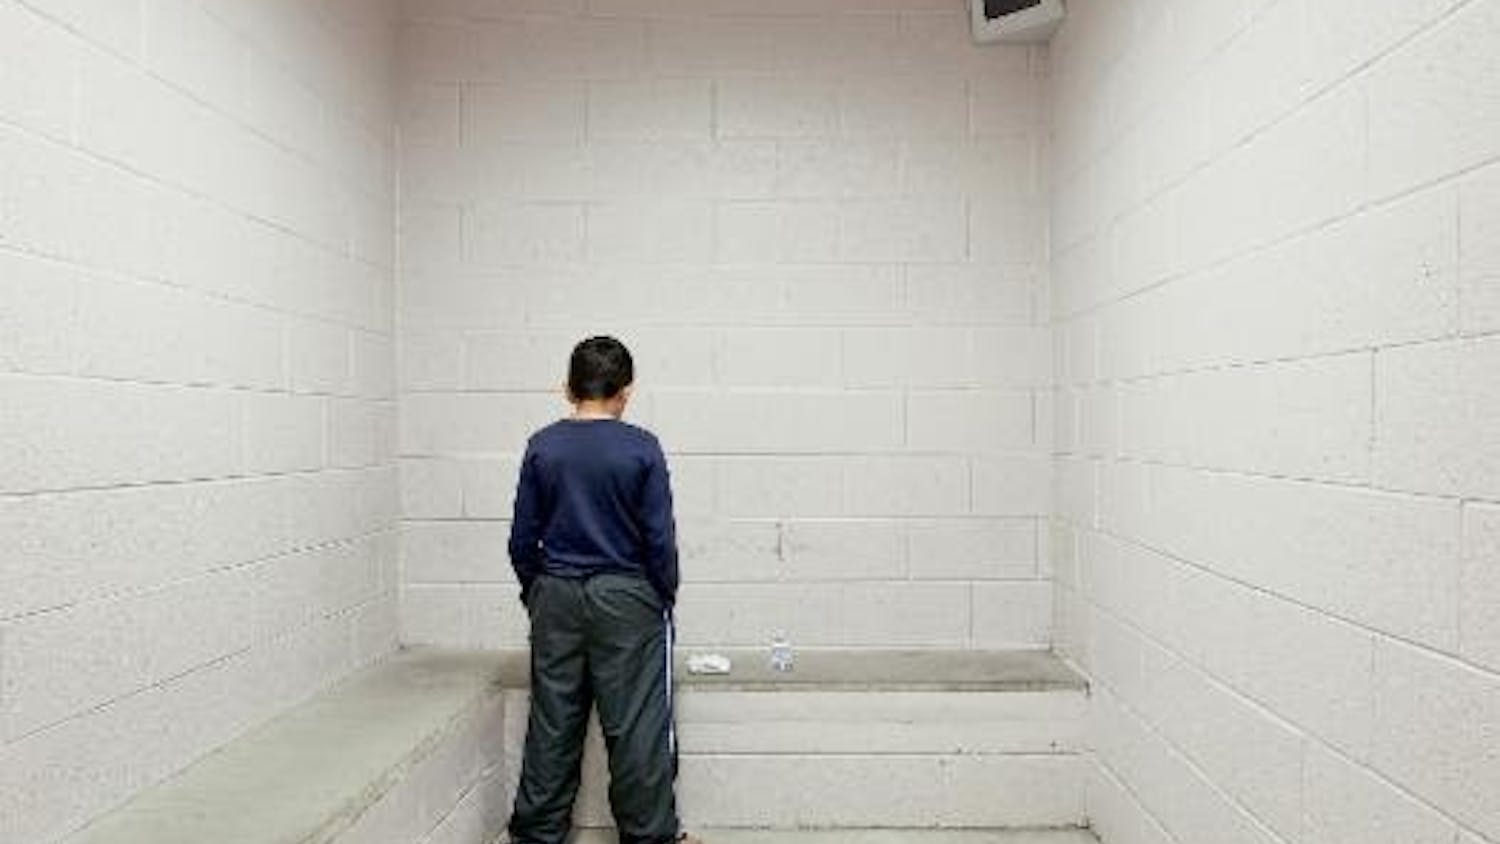 Richard Ross (American, b. 1947). "I'm waiting for my mom to come get me. Is she in there? She's at work today. I want to go home. I got in trouble at school today." -R.T., age 10. Washoe County Detention Facility, Reno, Nevada, from Juvenile in Justice, 2012.&nbsp;